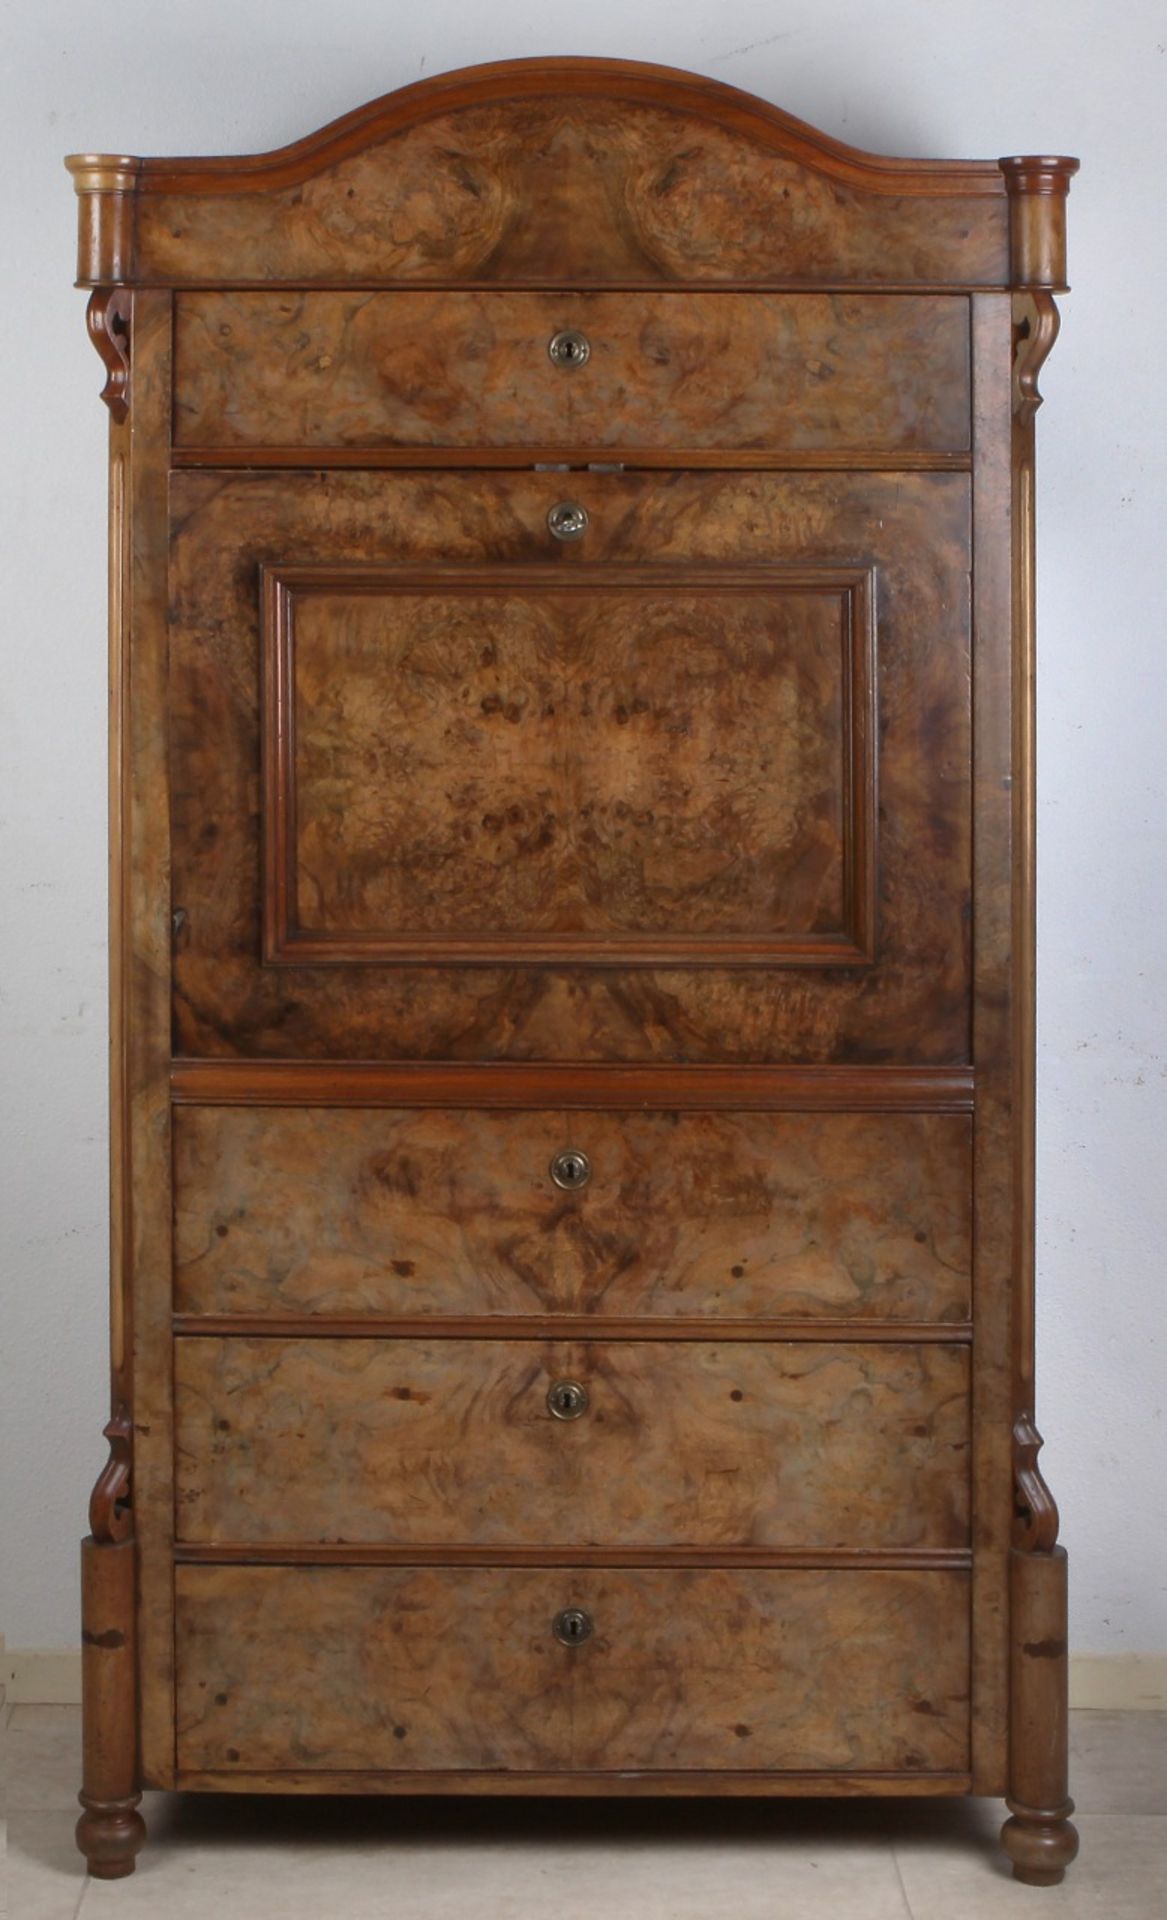 German walnut Louis Philippe desk around 1870 with beautiful inlaid nest, with several drawers and